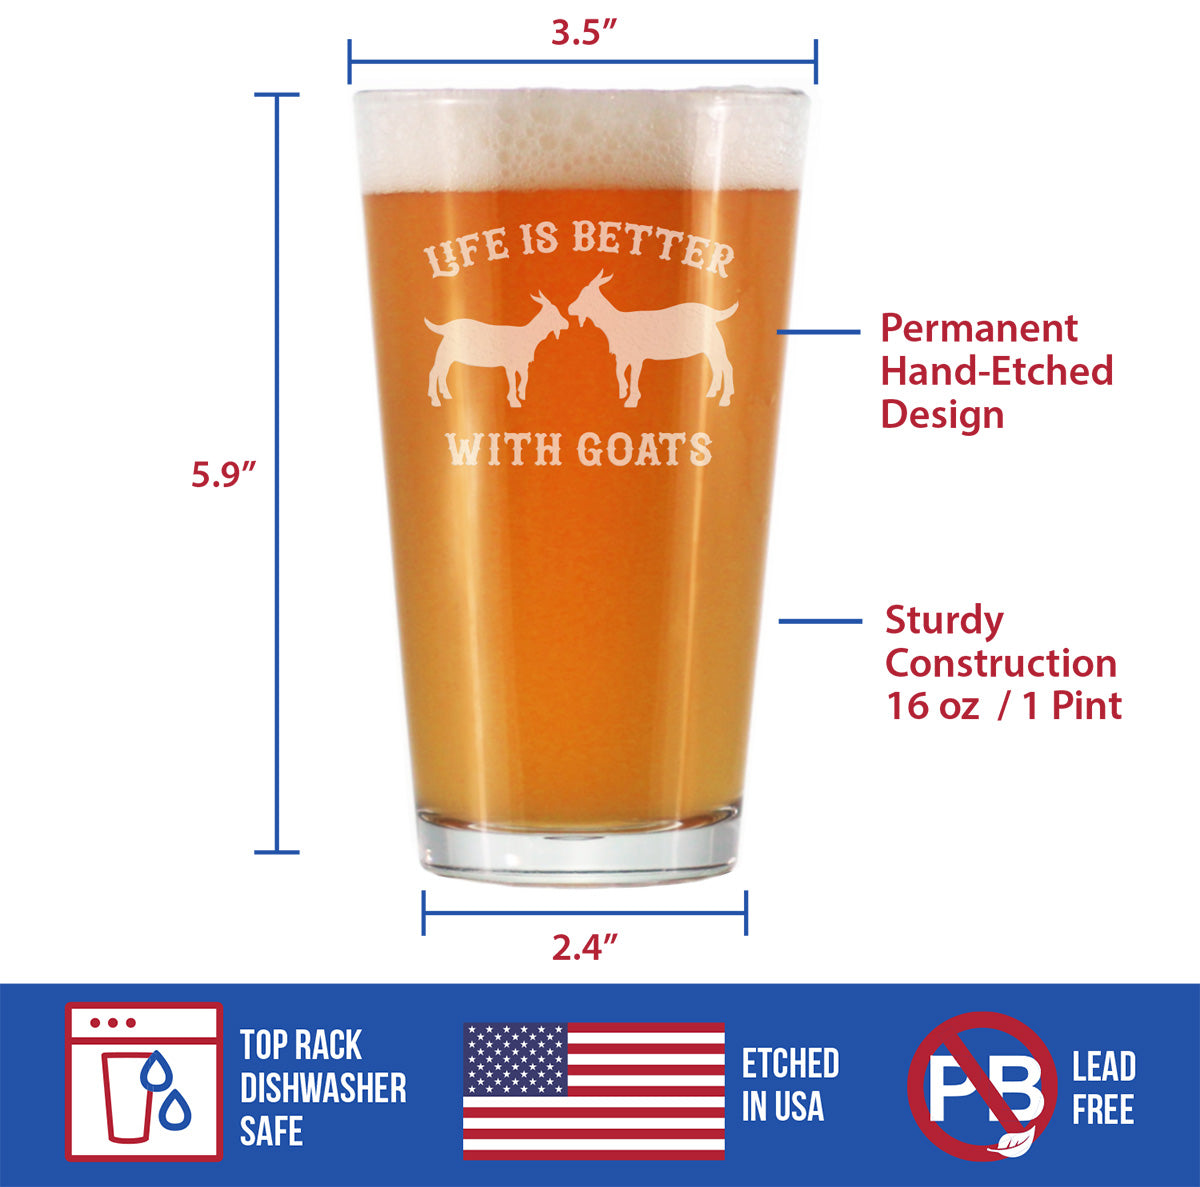 Life is Better With Goats - Goat Pint Glass for Beer - Unique Funny Farm Animal Themed Decor and Gifts - 16 Oz